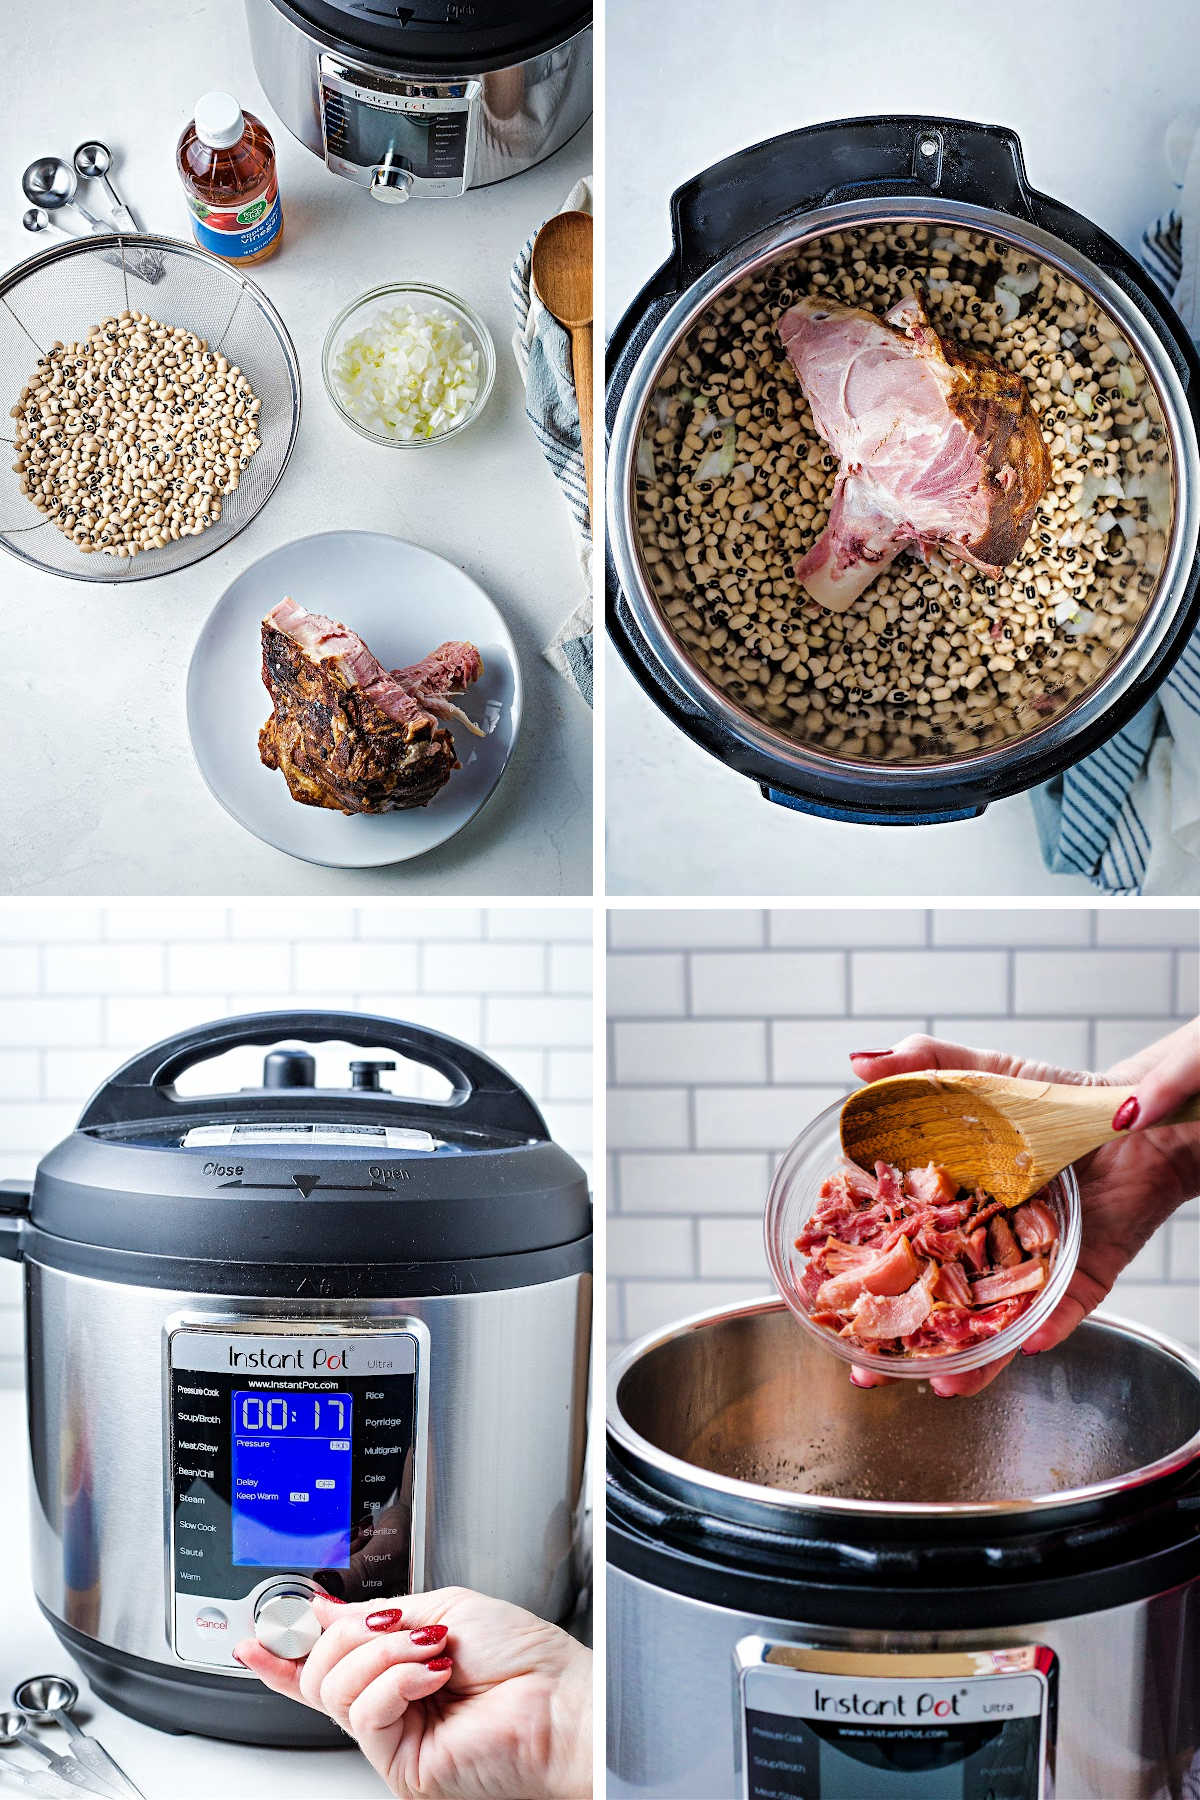 process steps for making instant pot black eyed peas: layer ingredients in pot; set time and pressure; add ham chunks at the end of cooking.